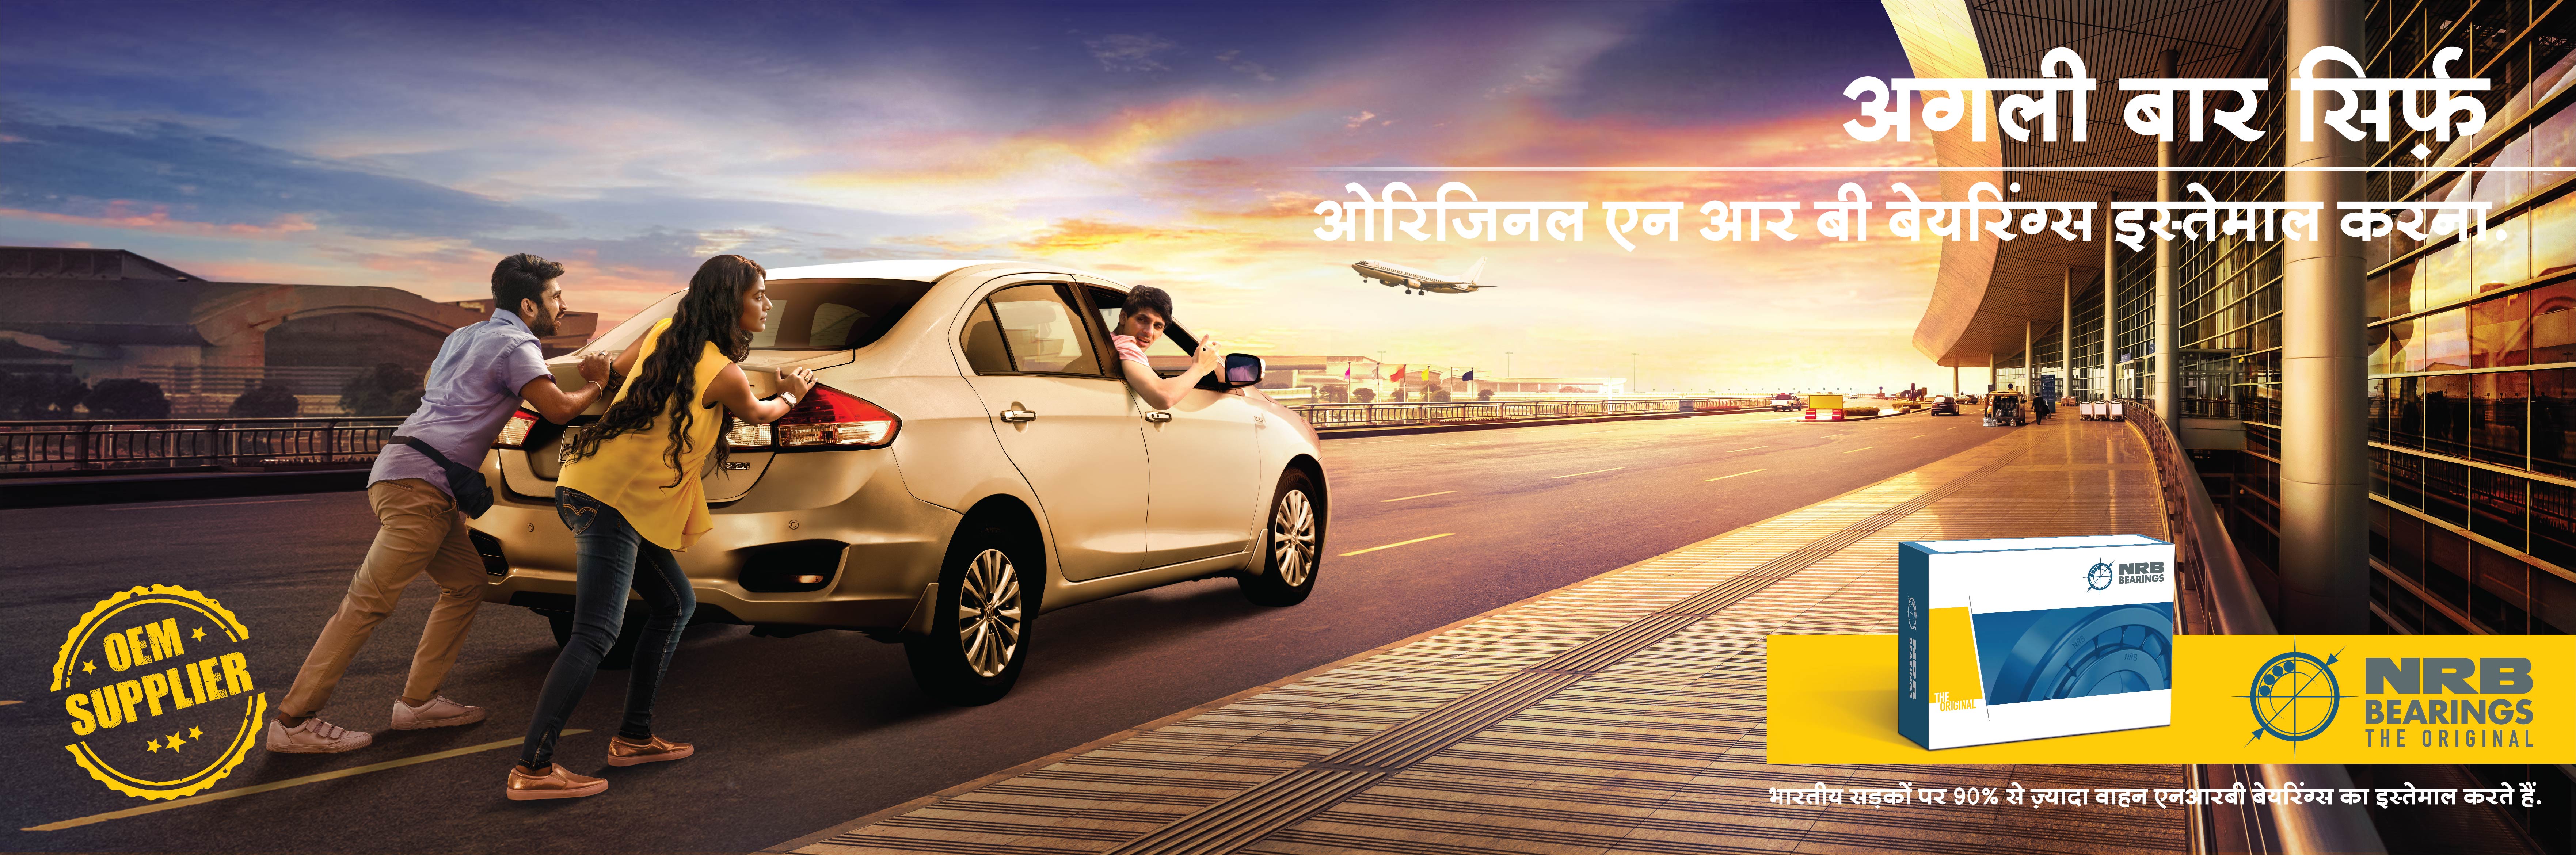 People pushing a car - NRB Ad. shot by professional photographer